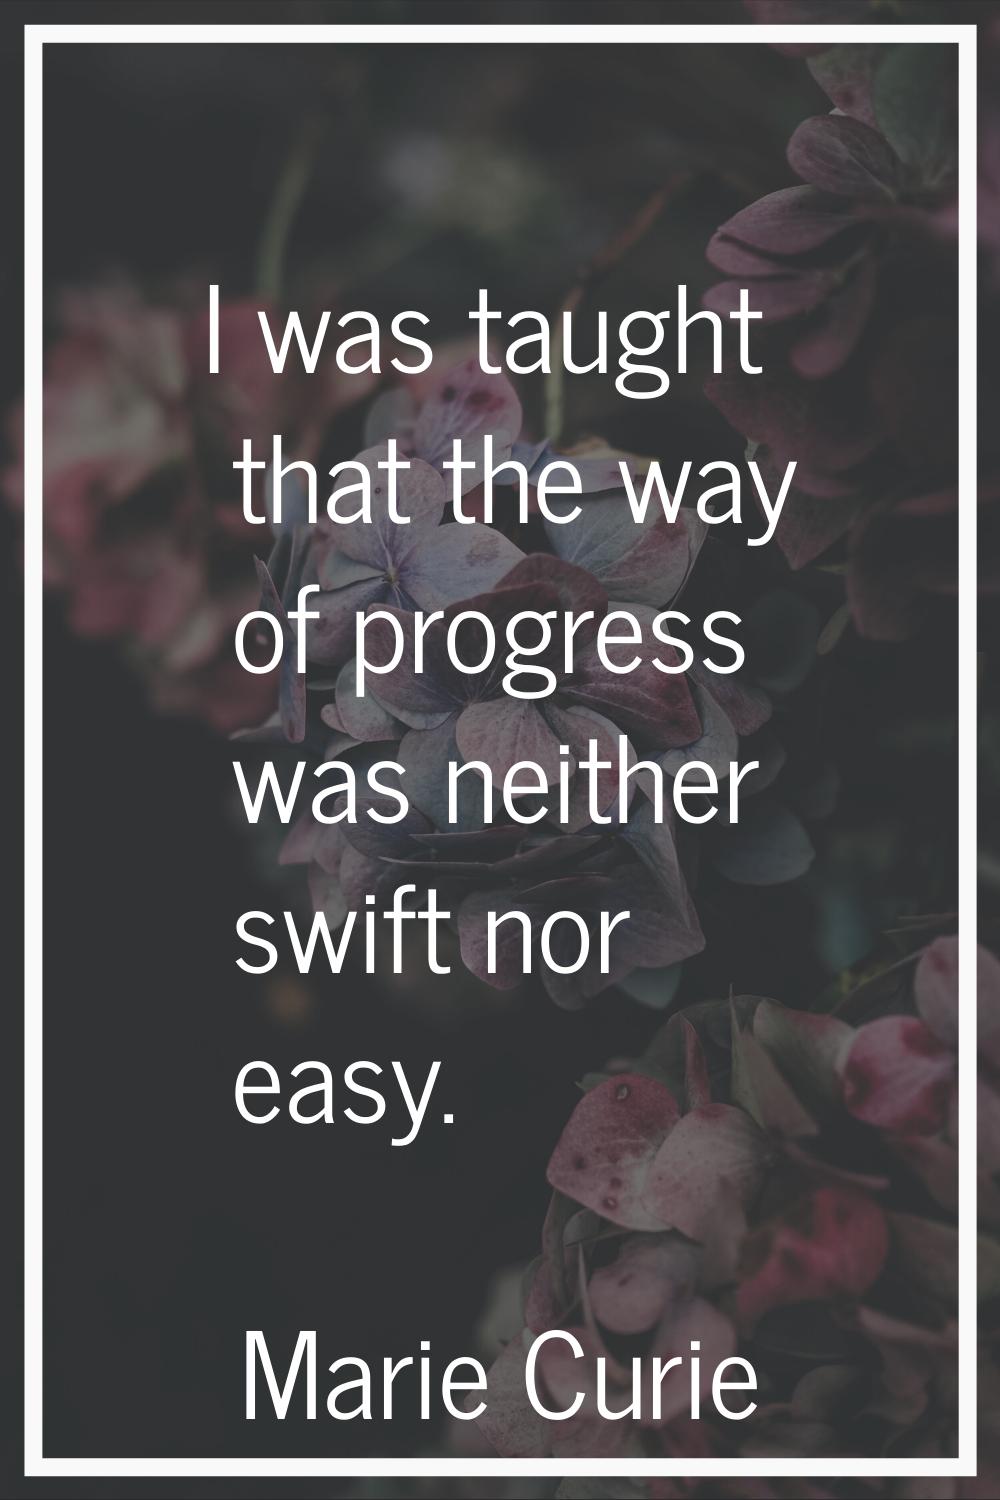 I was taught that the way of progress was neither swift nor easy.